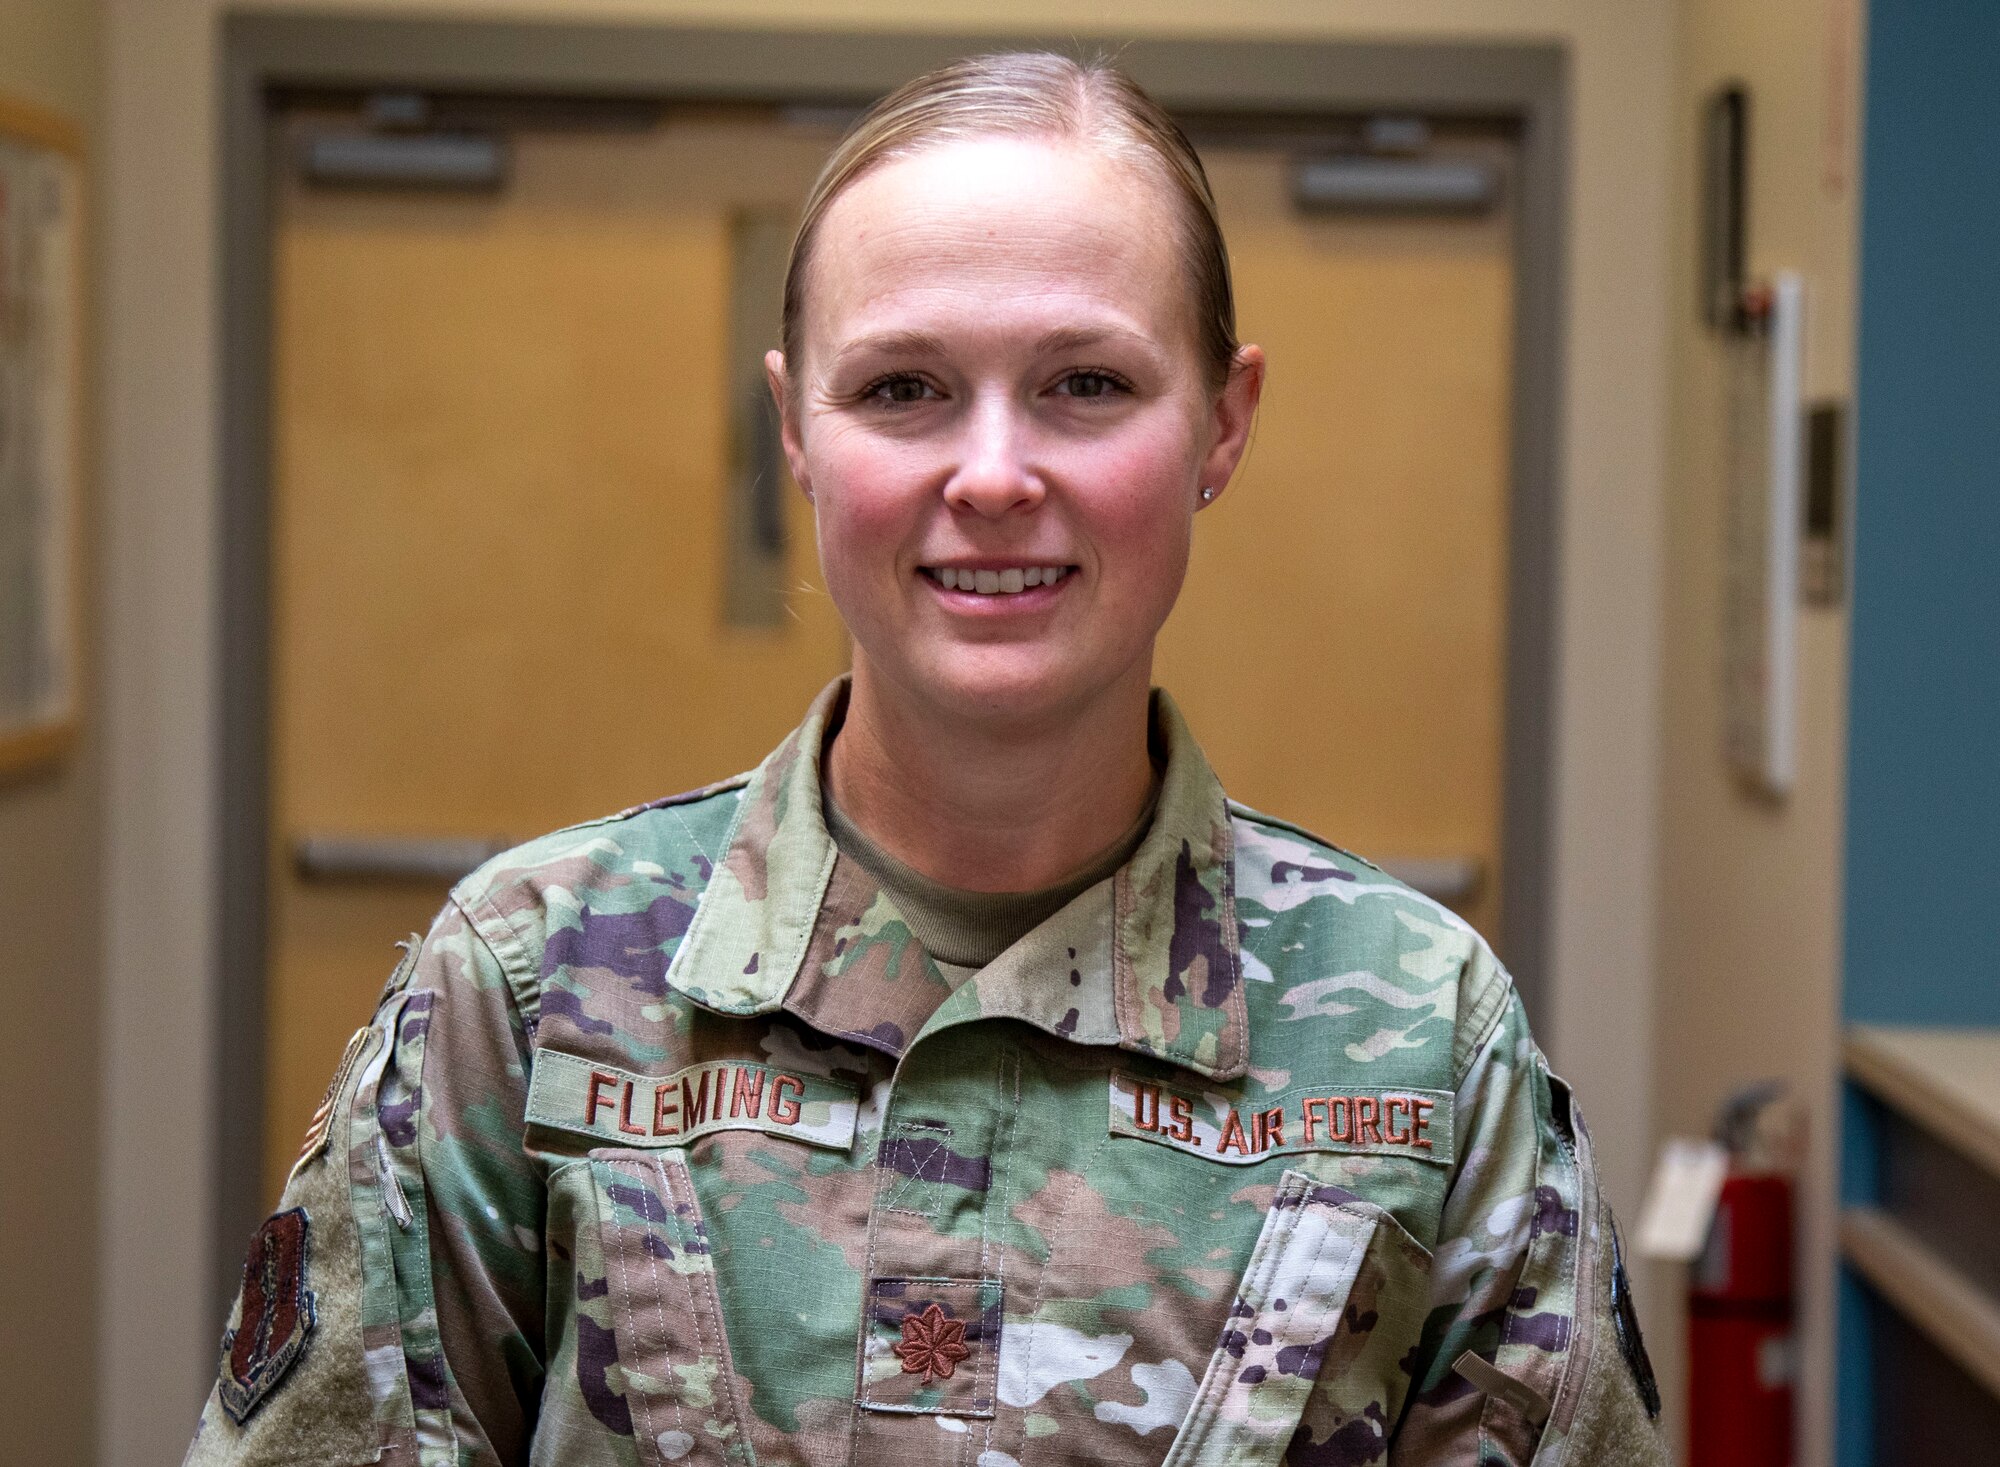 Maj. Lyndsey Fleming, lead of Task Force Vaccine, poses for a photo at Joint Force Headquarters in Concord on Sept. 29. Photo by Sgt. Courtney Rorick, 114th Public Affairs Detachment NCOIC